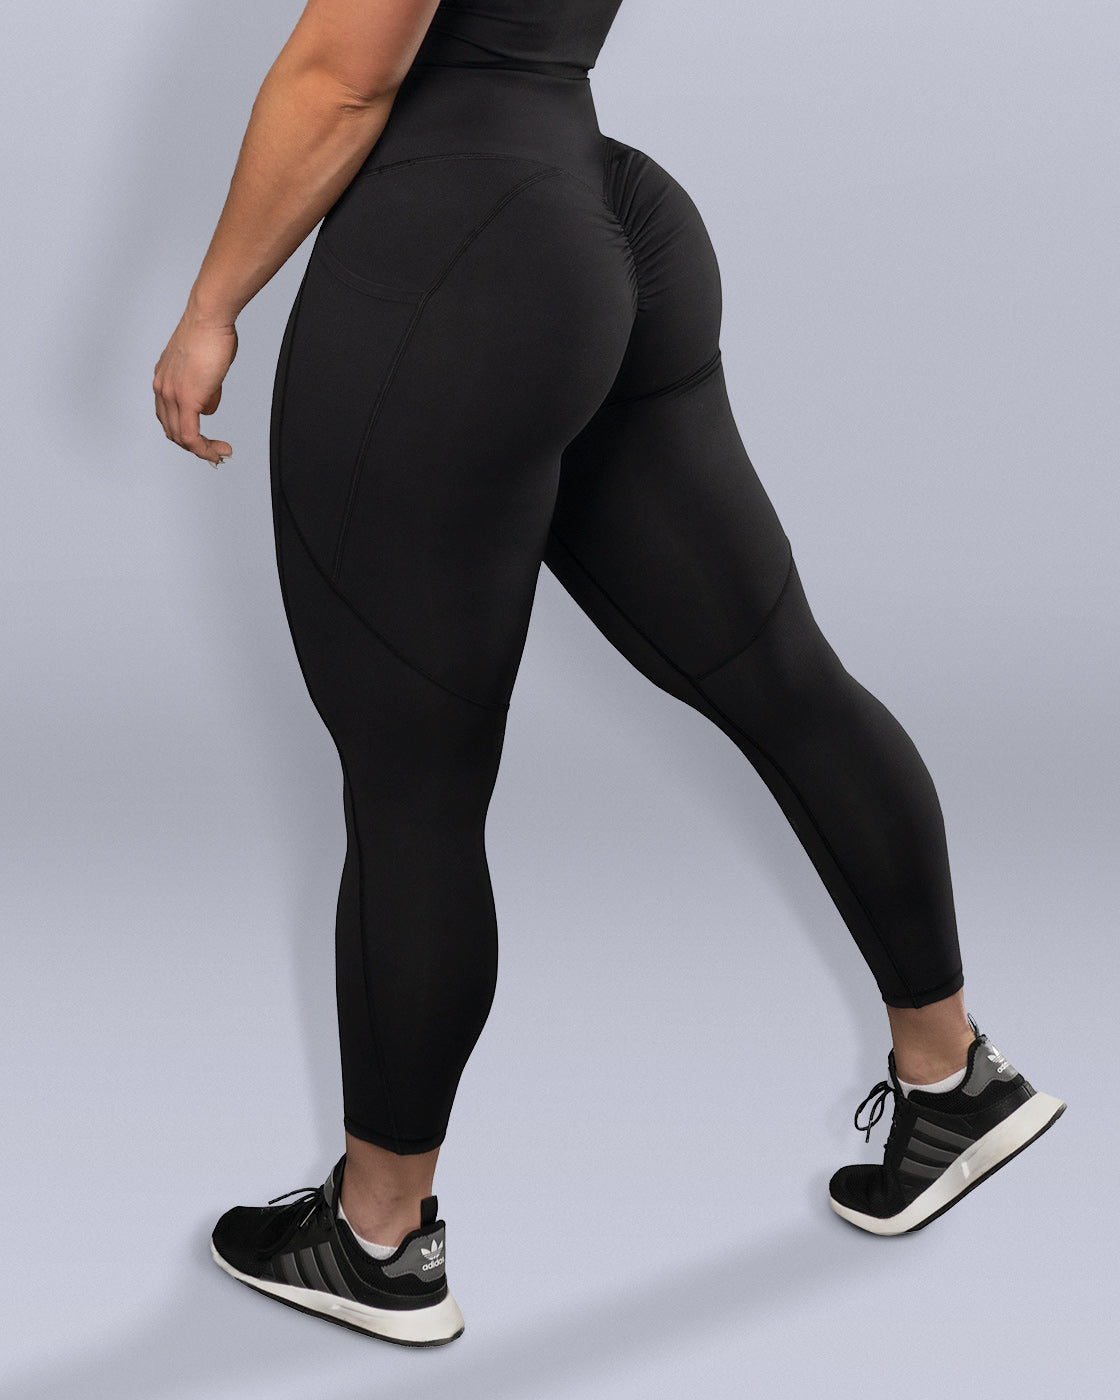 Leggings Your Booty Will Thank You For I LA7